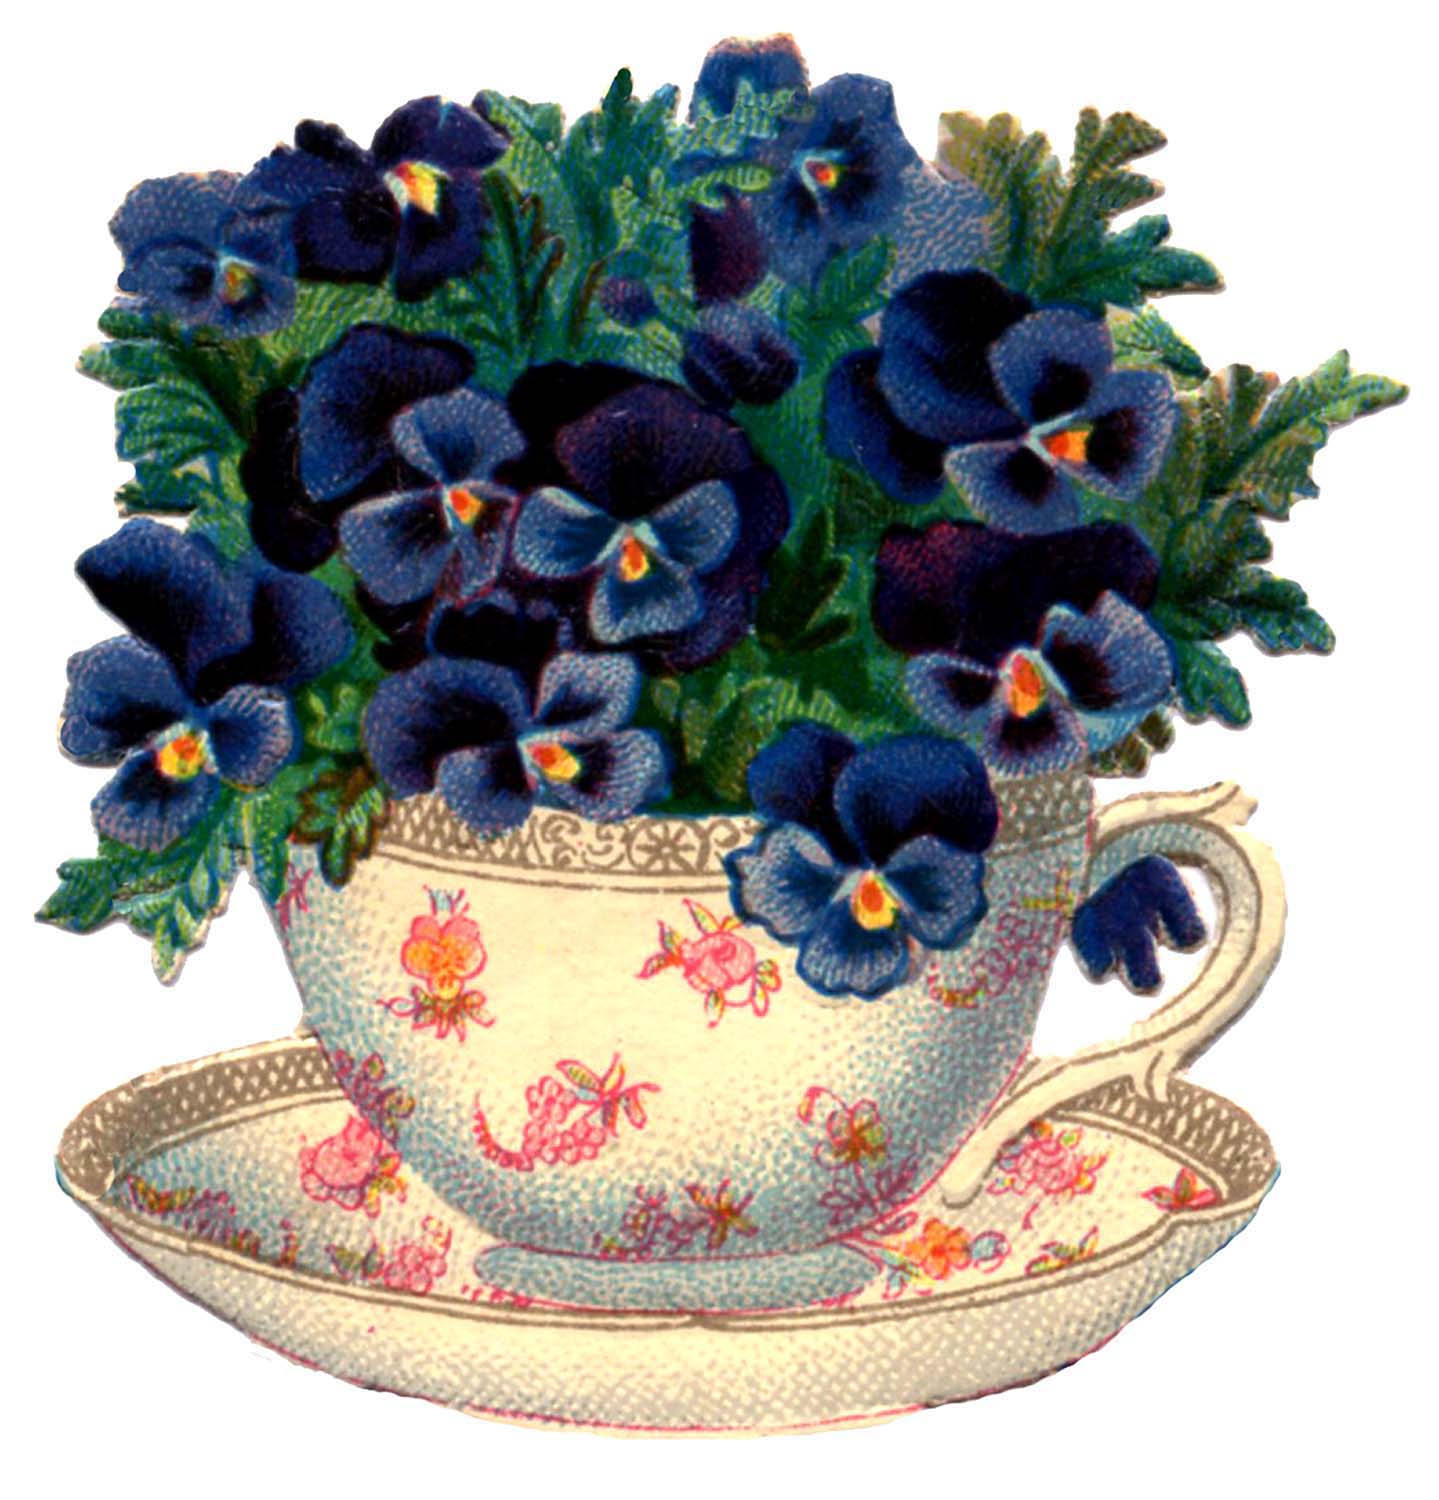 Teacup Image with Flowers